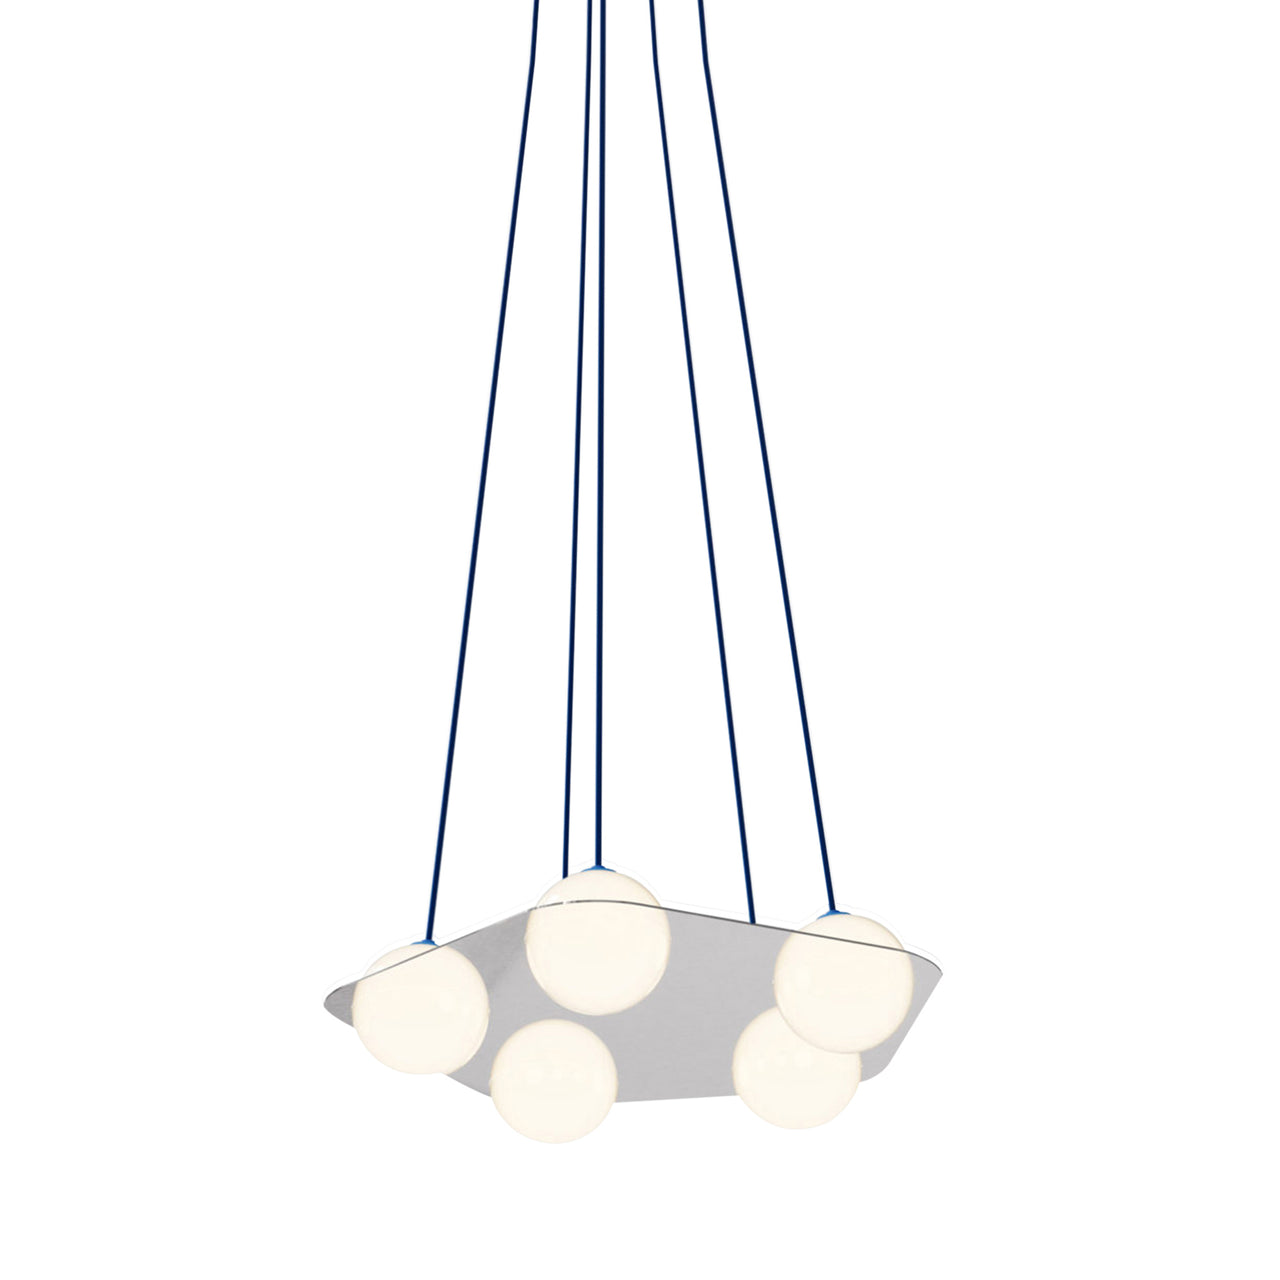 Laurent 04 Suspension Lamp: Nickel Plated + Blue + Angled Wires